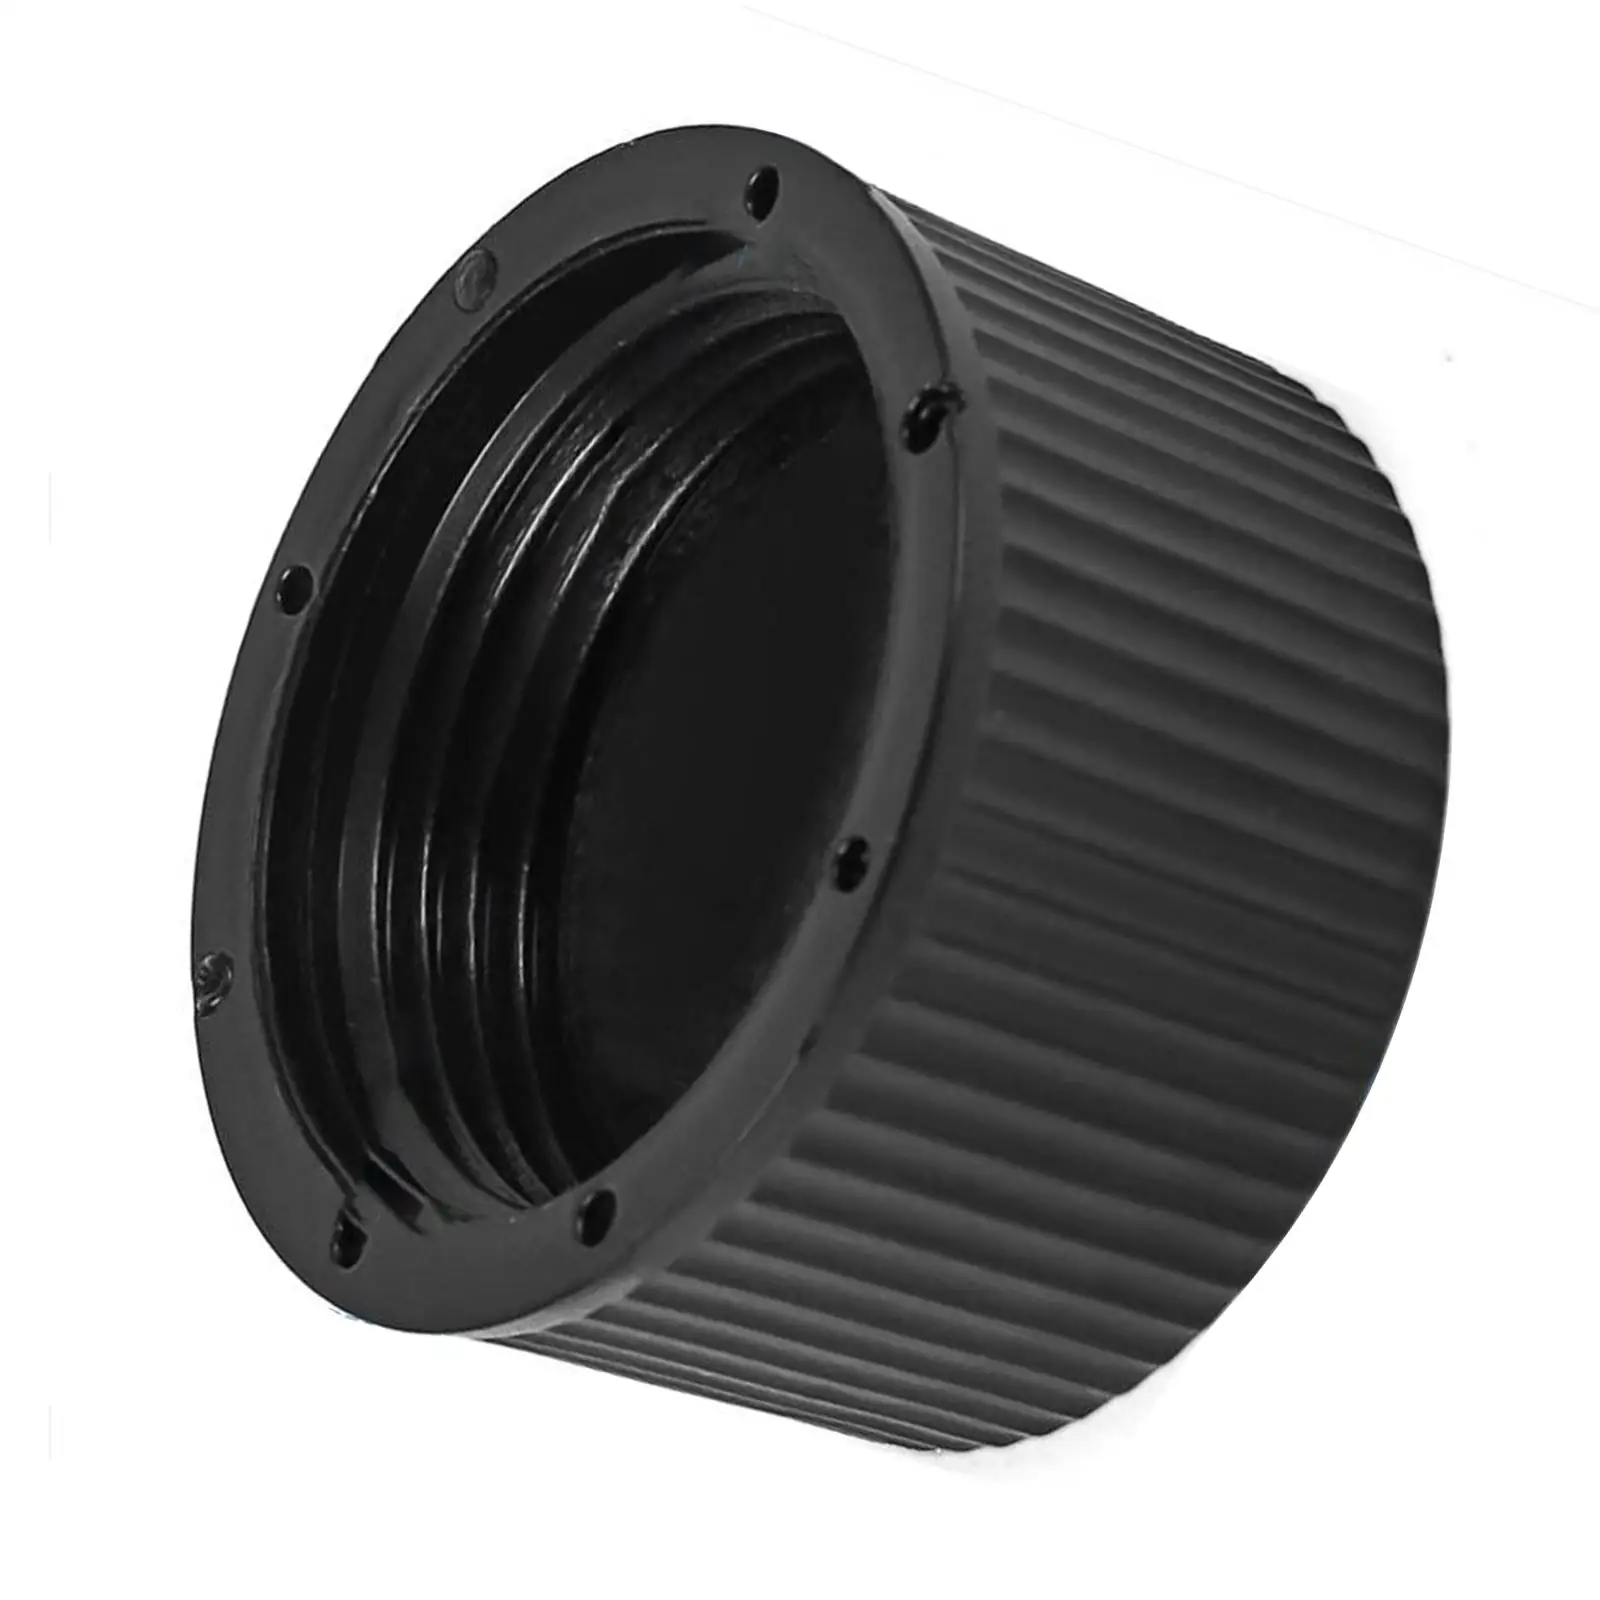 Replacement Drain Cap Heavy Duty Lightweight Sand Filter Cover Pool Sand Filter Drain Cap for Outdoor Swimming Pool Spas Hot Tub